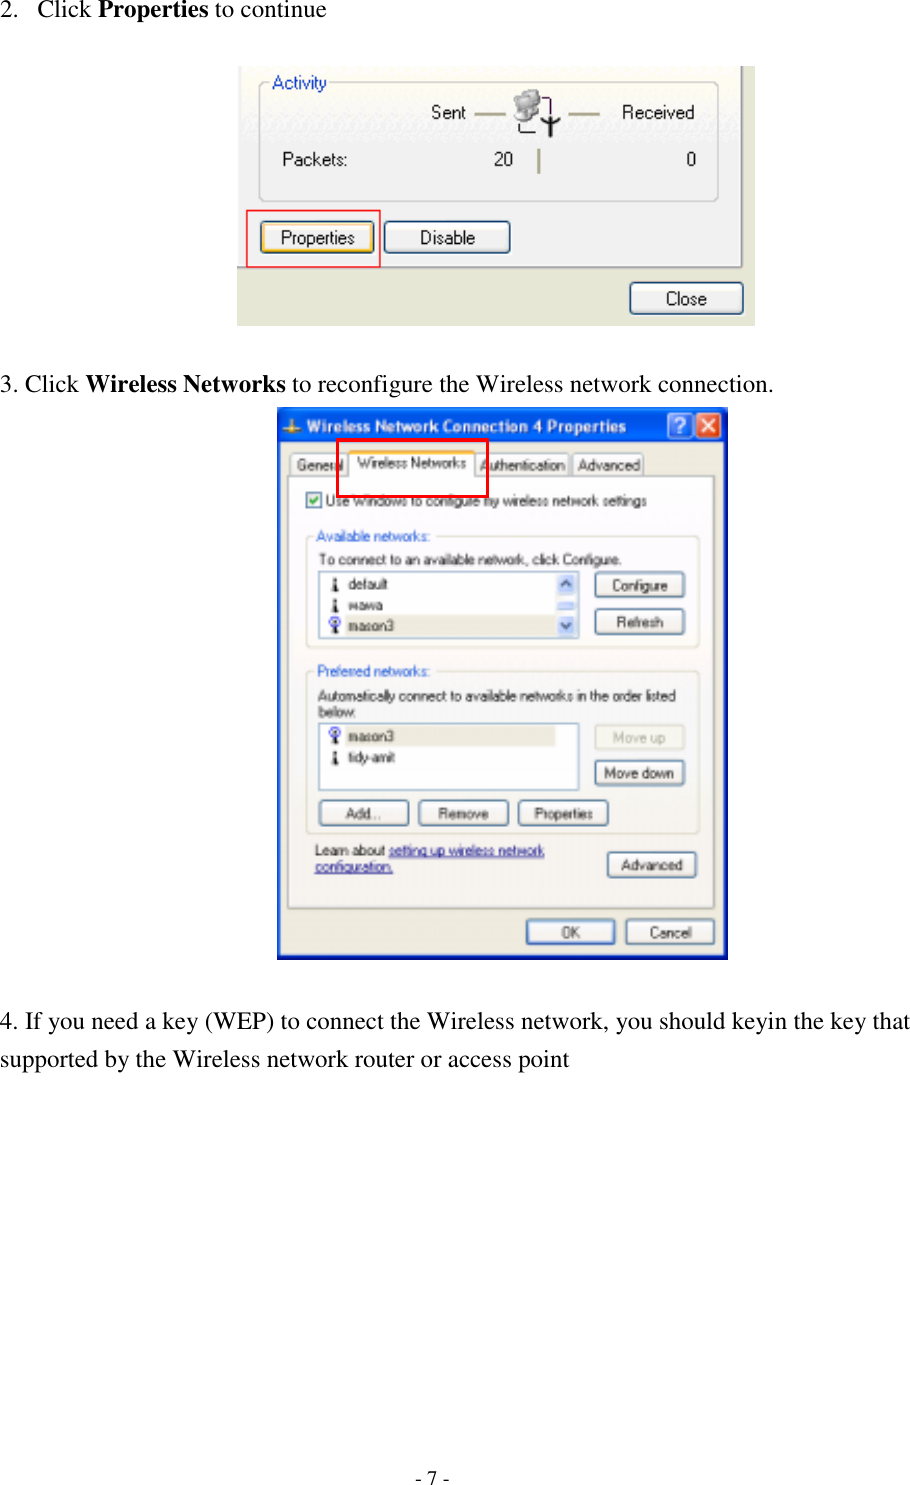    - 7 - 2. Click Properties to continue    3. Click Wireless Networks to reconfigure the Wireless network connection.   4. If you need a key (WEP) to connect the Wireless network, you should keyin the key that supported by the Wireless network router or access point 